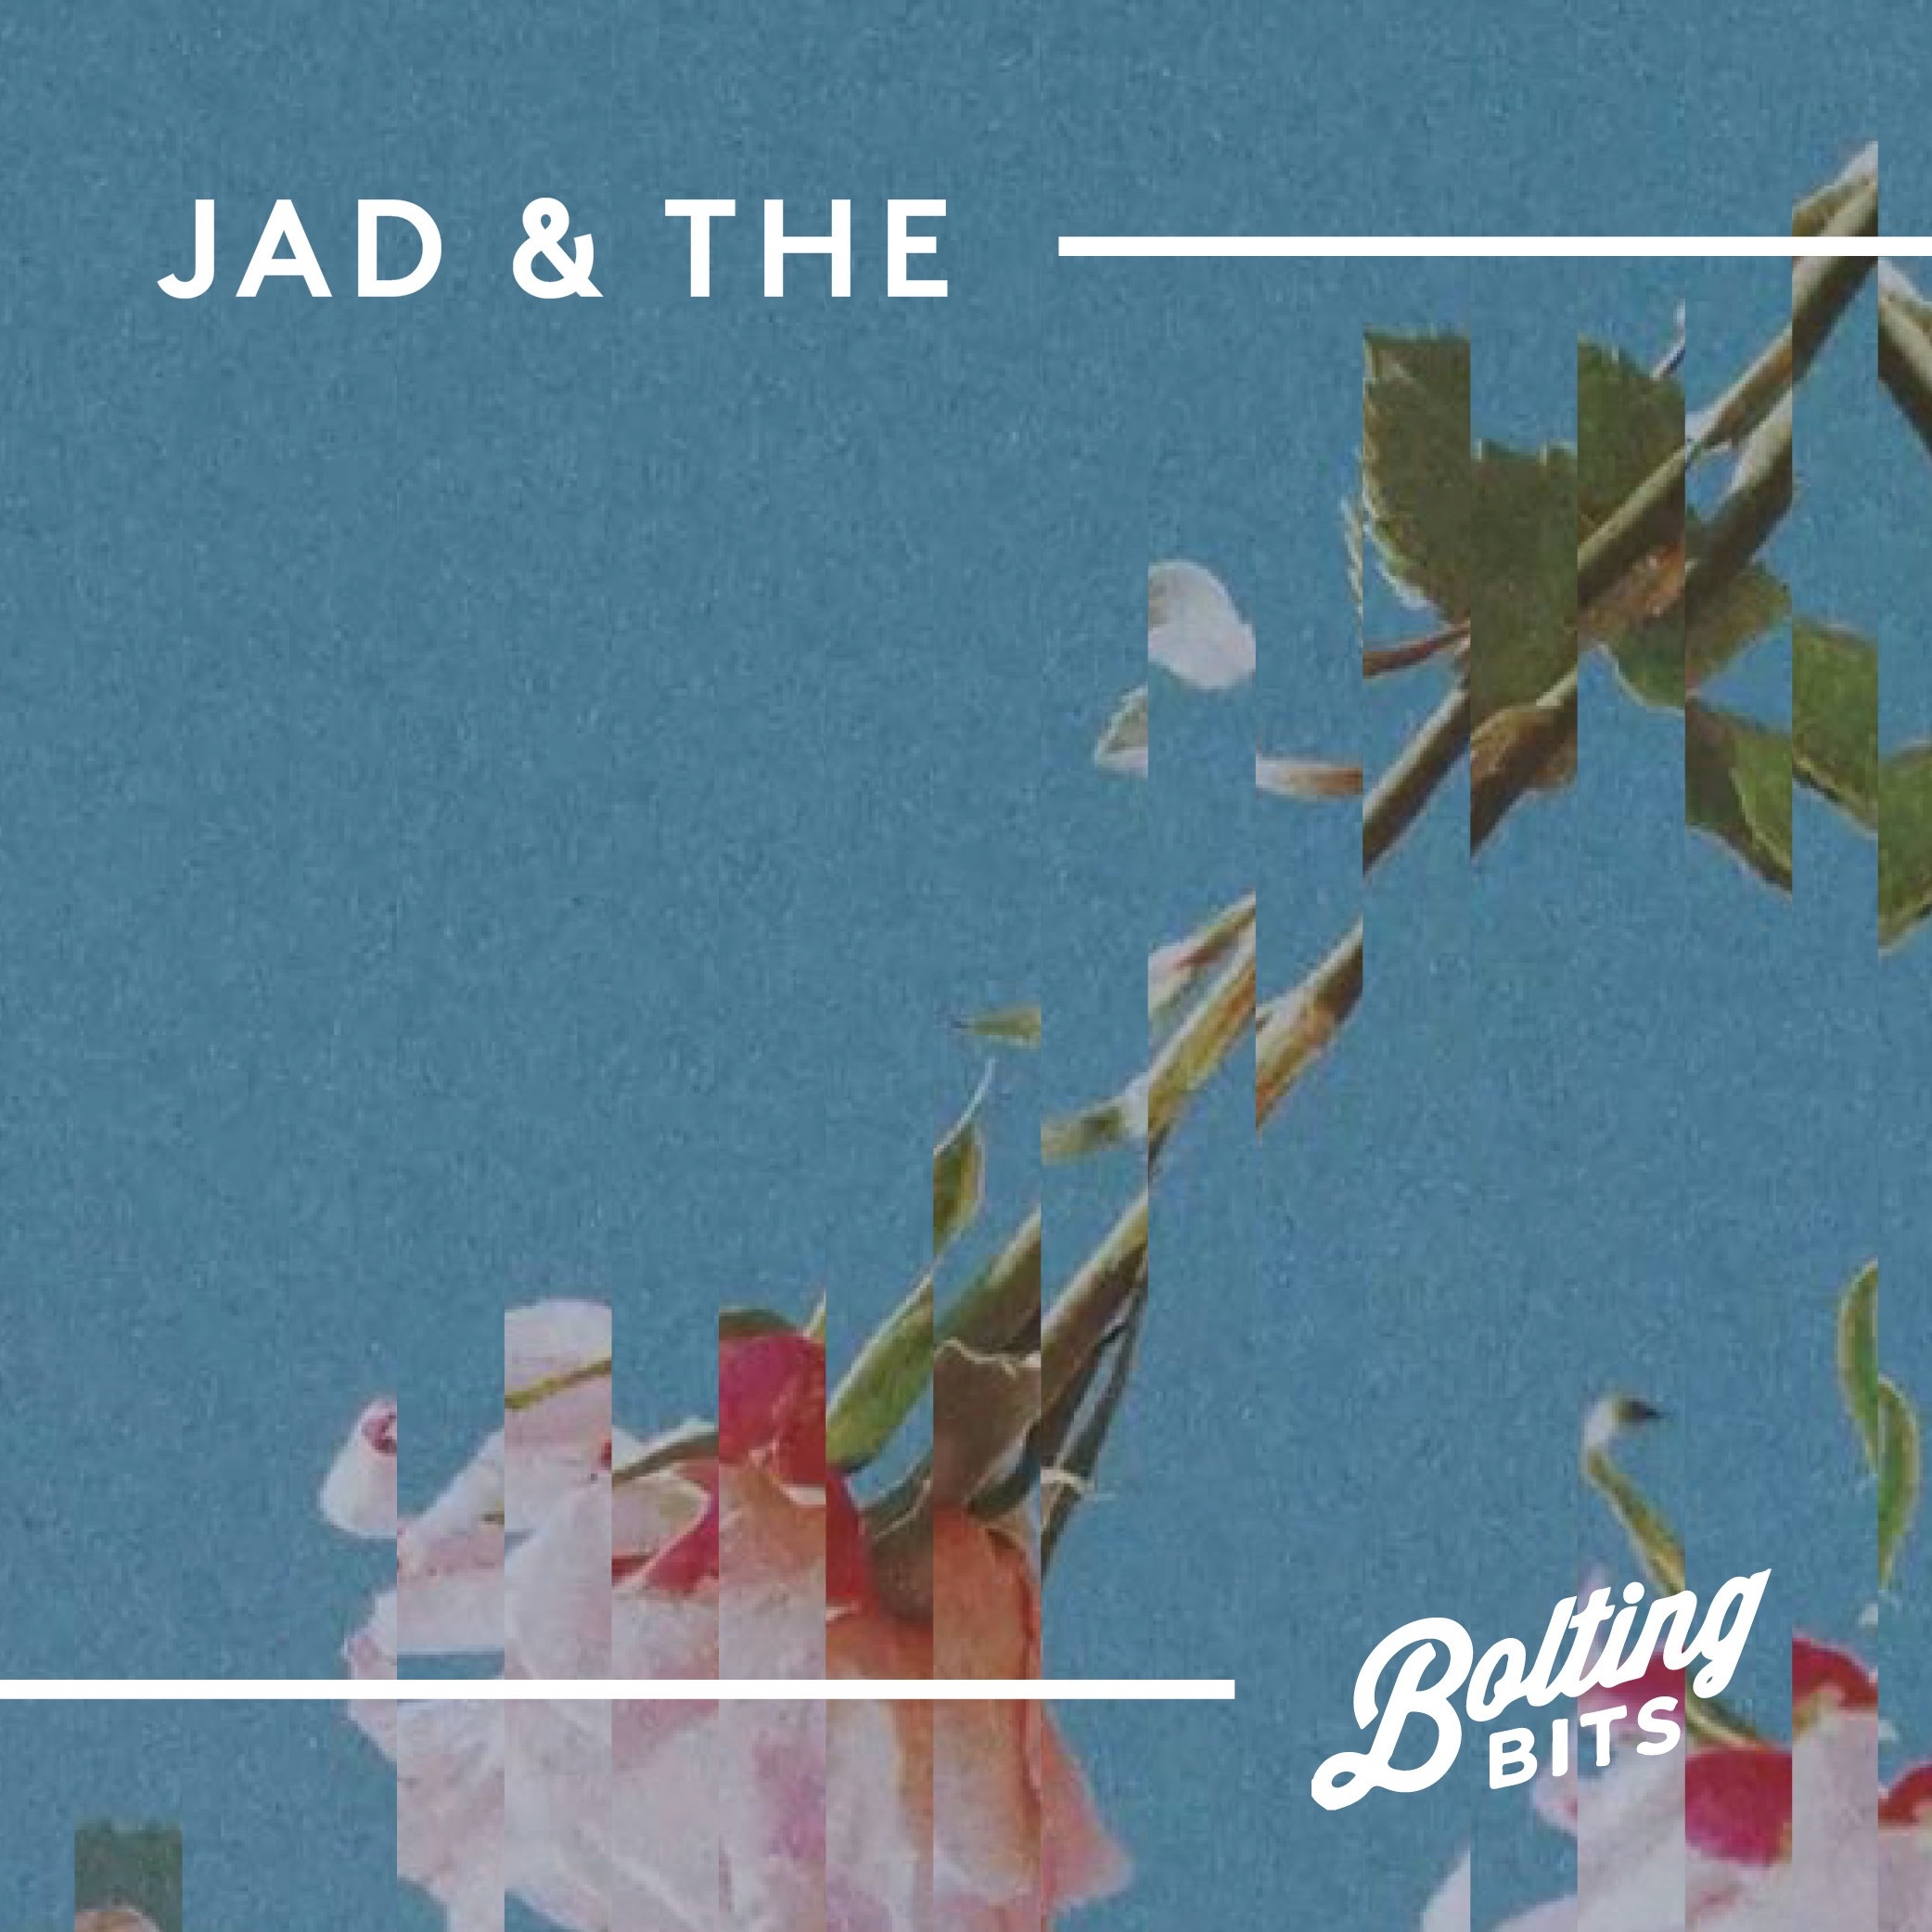 MIXED BY/ Jad & The